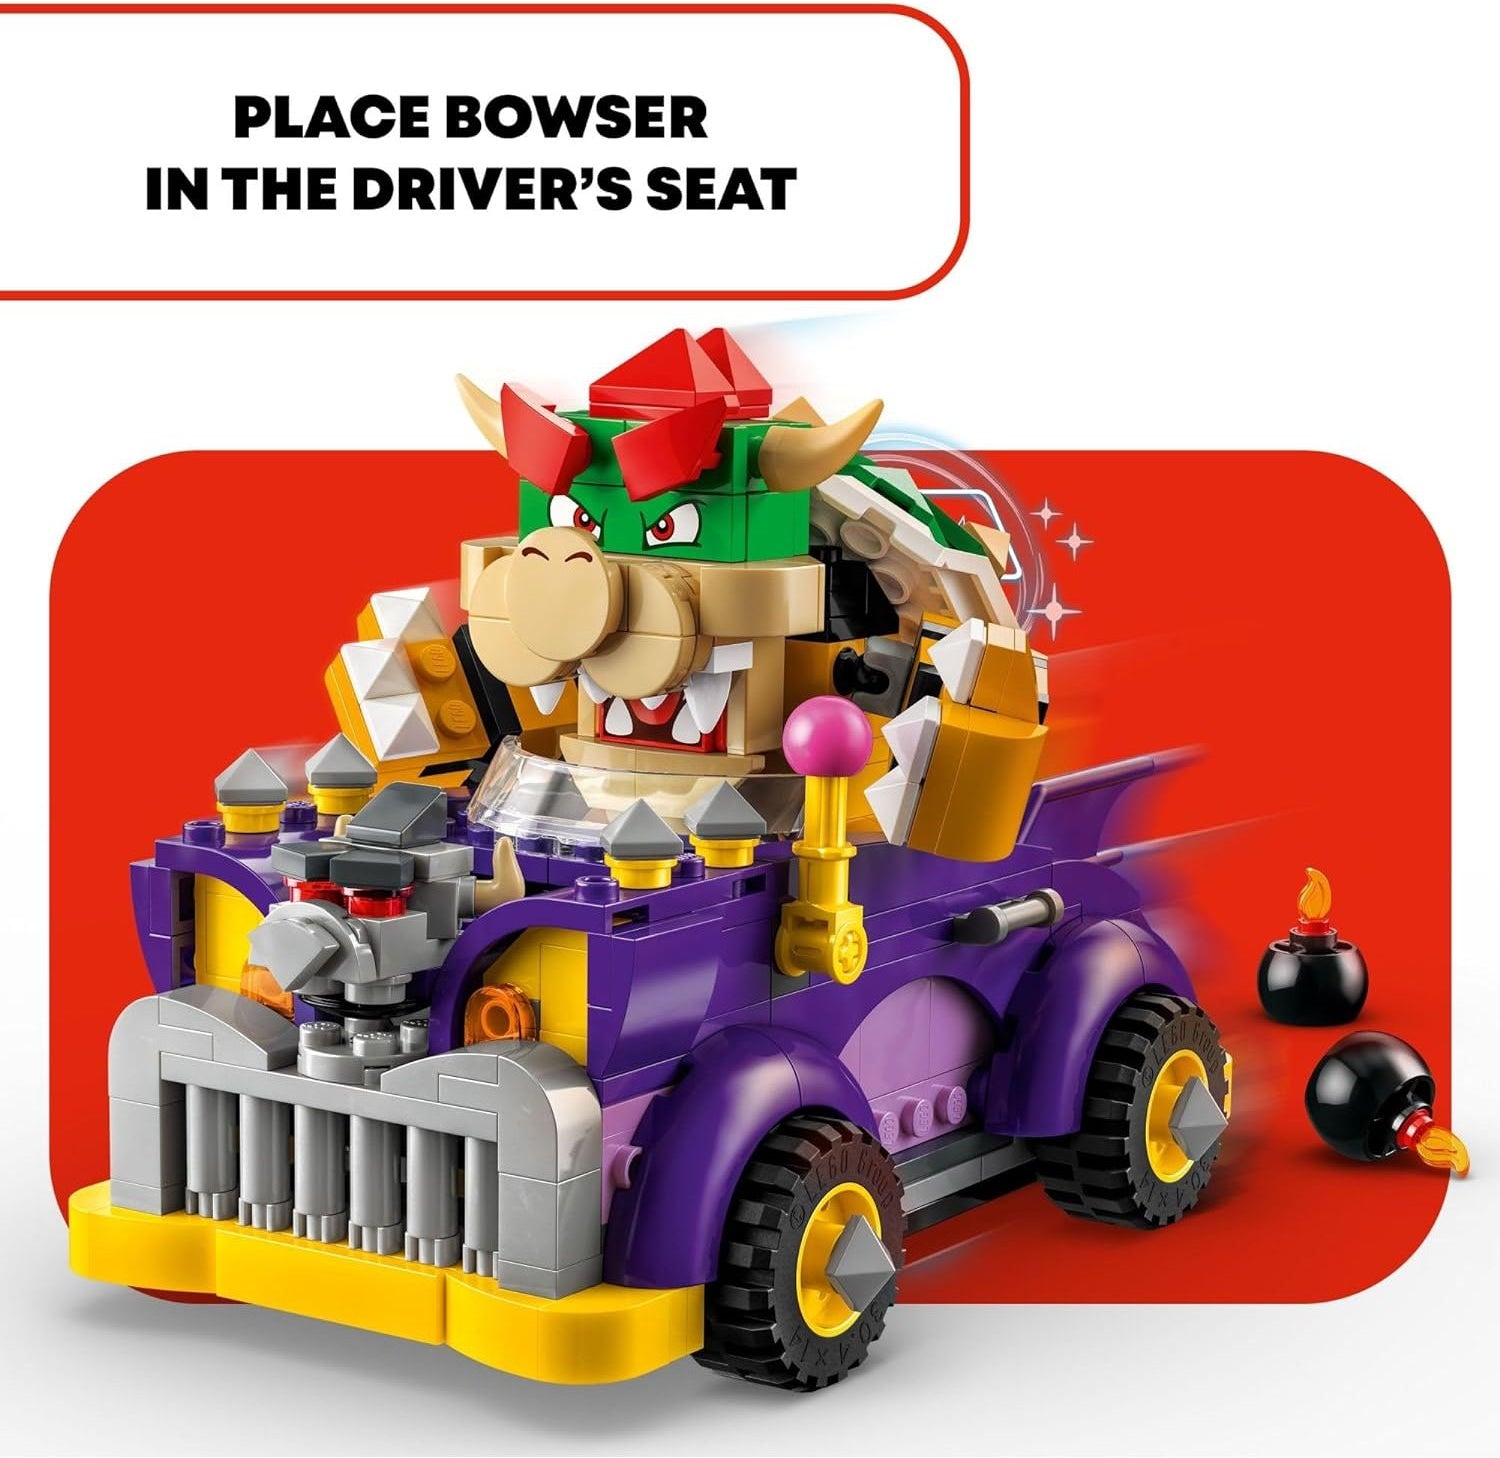 LEGO 71431 Super Mario Bowser’s Muscle Car Expansion Set, Collectible Bowser Toy for Kids.